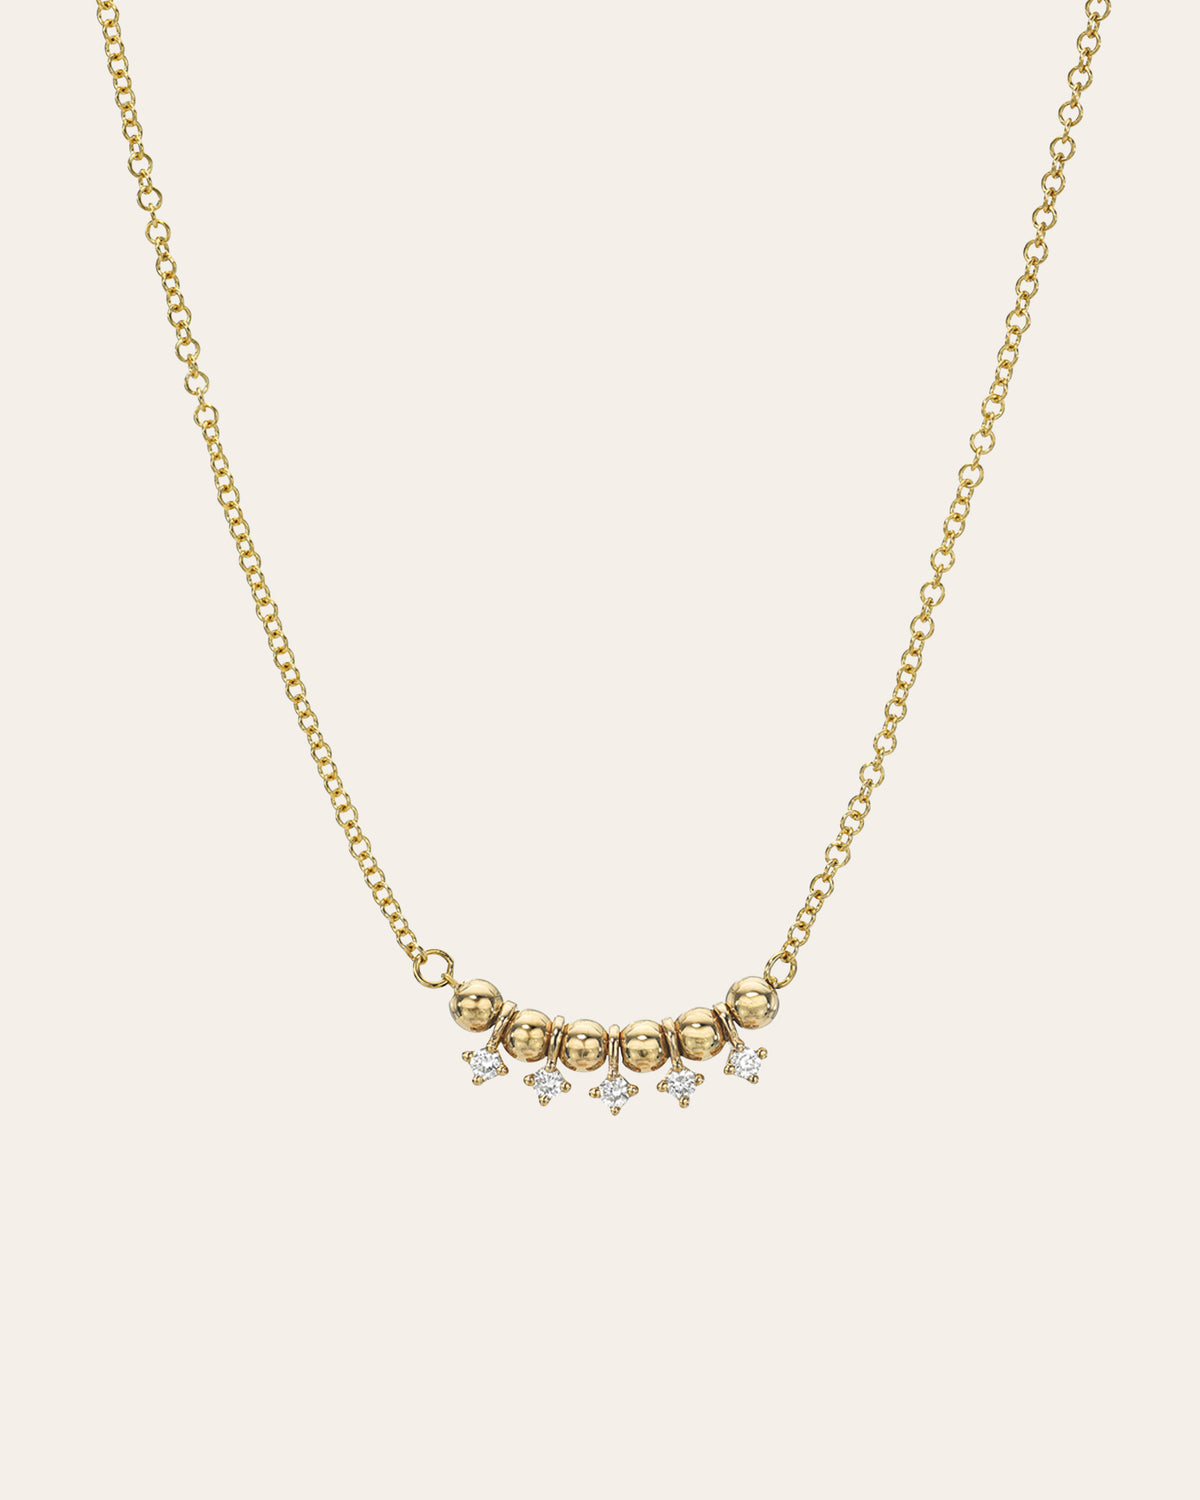 14K Gold Bead and Diamond Drop Necklace